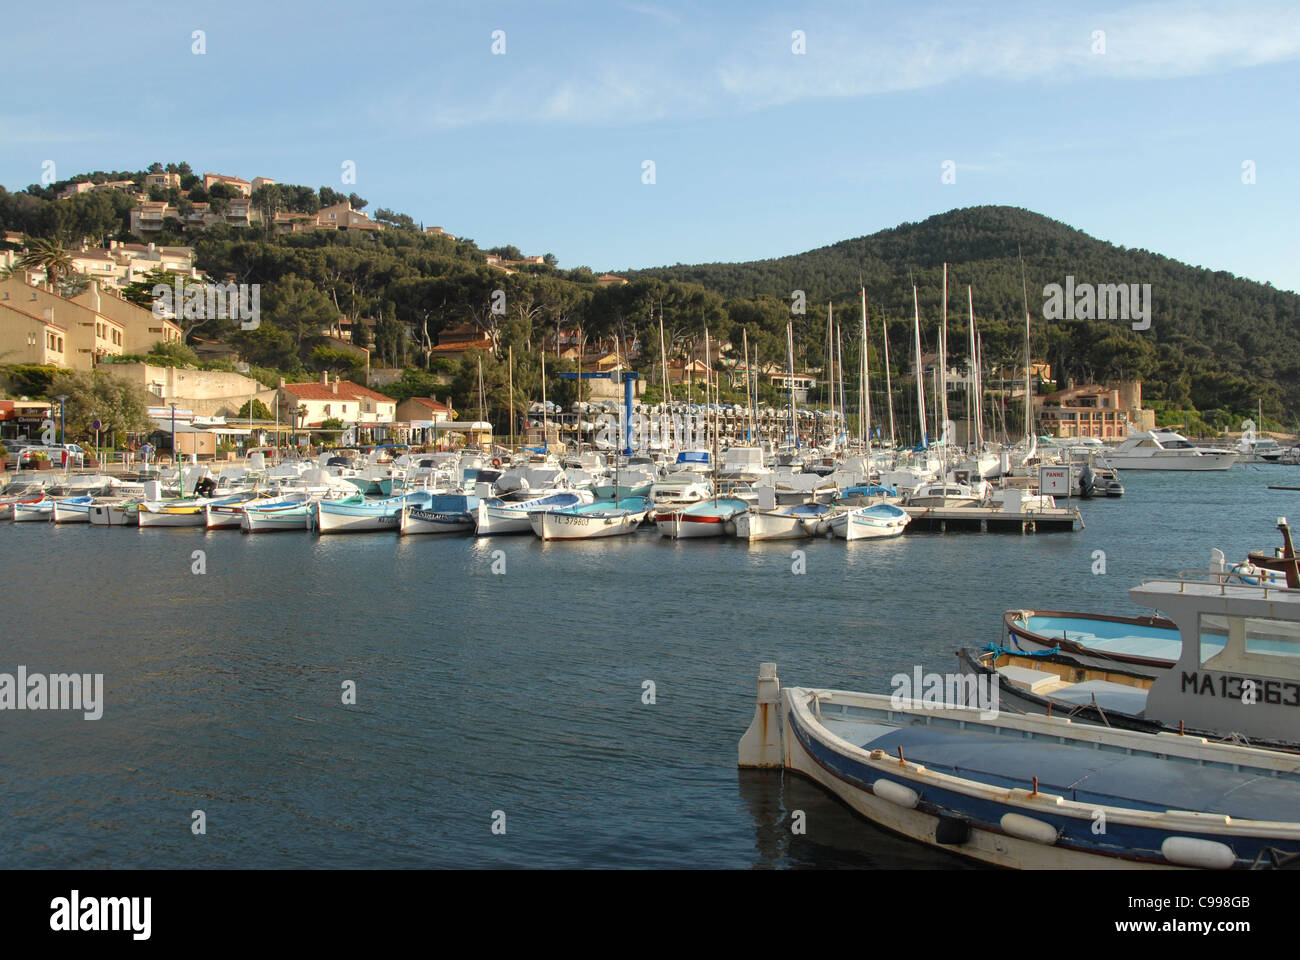 Sail boats and yachts in the port of La Madrague  near Saint-Cyr-sur-Mer in Var, Provence, France in summer Stock Photo